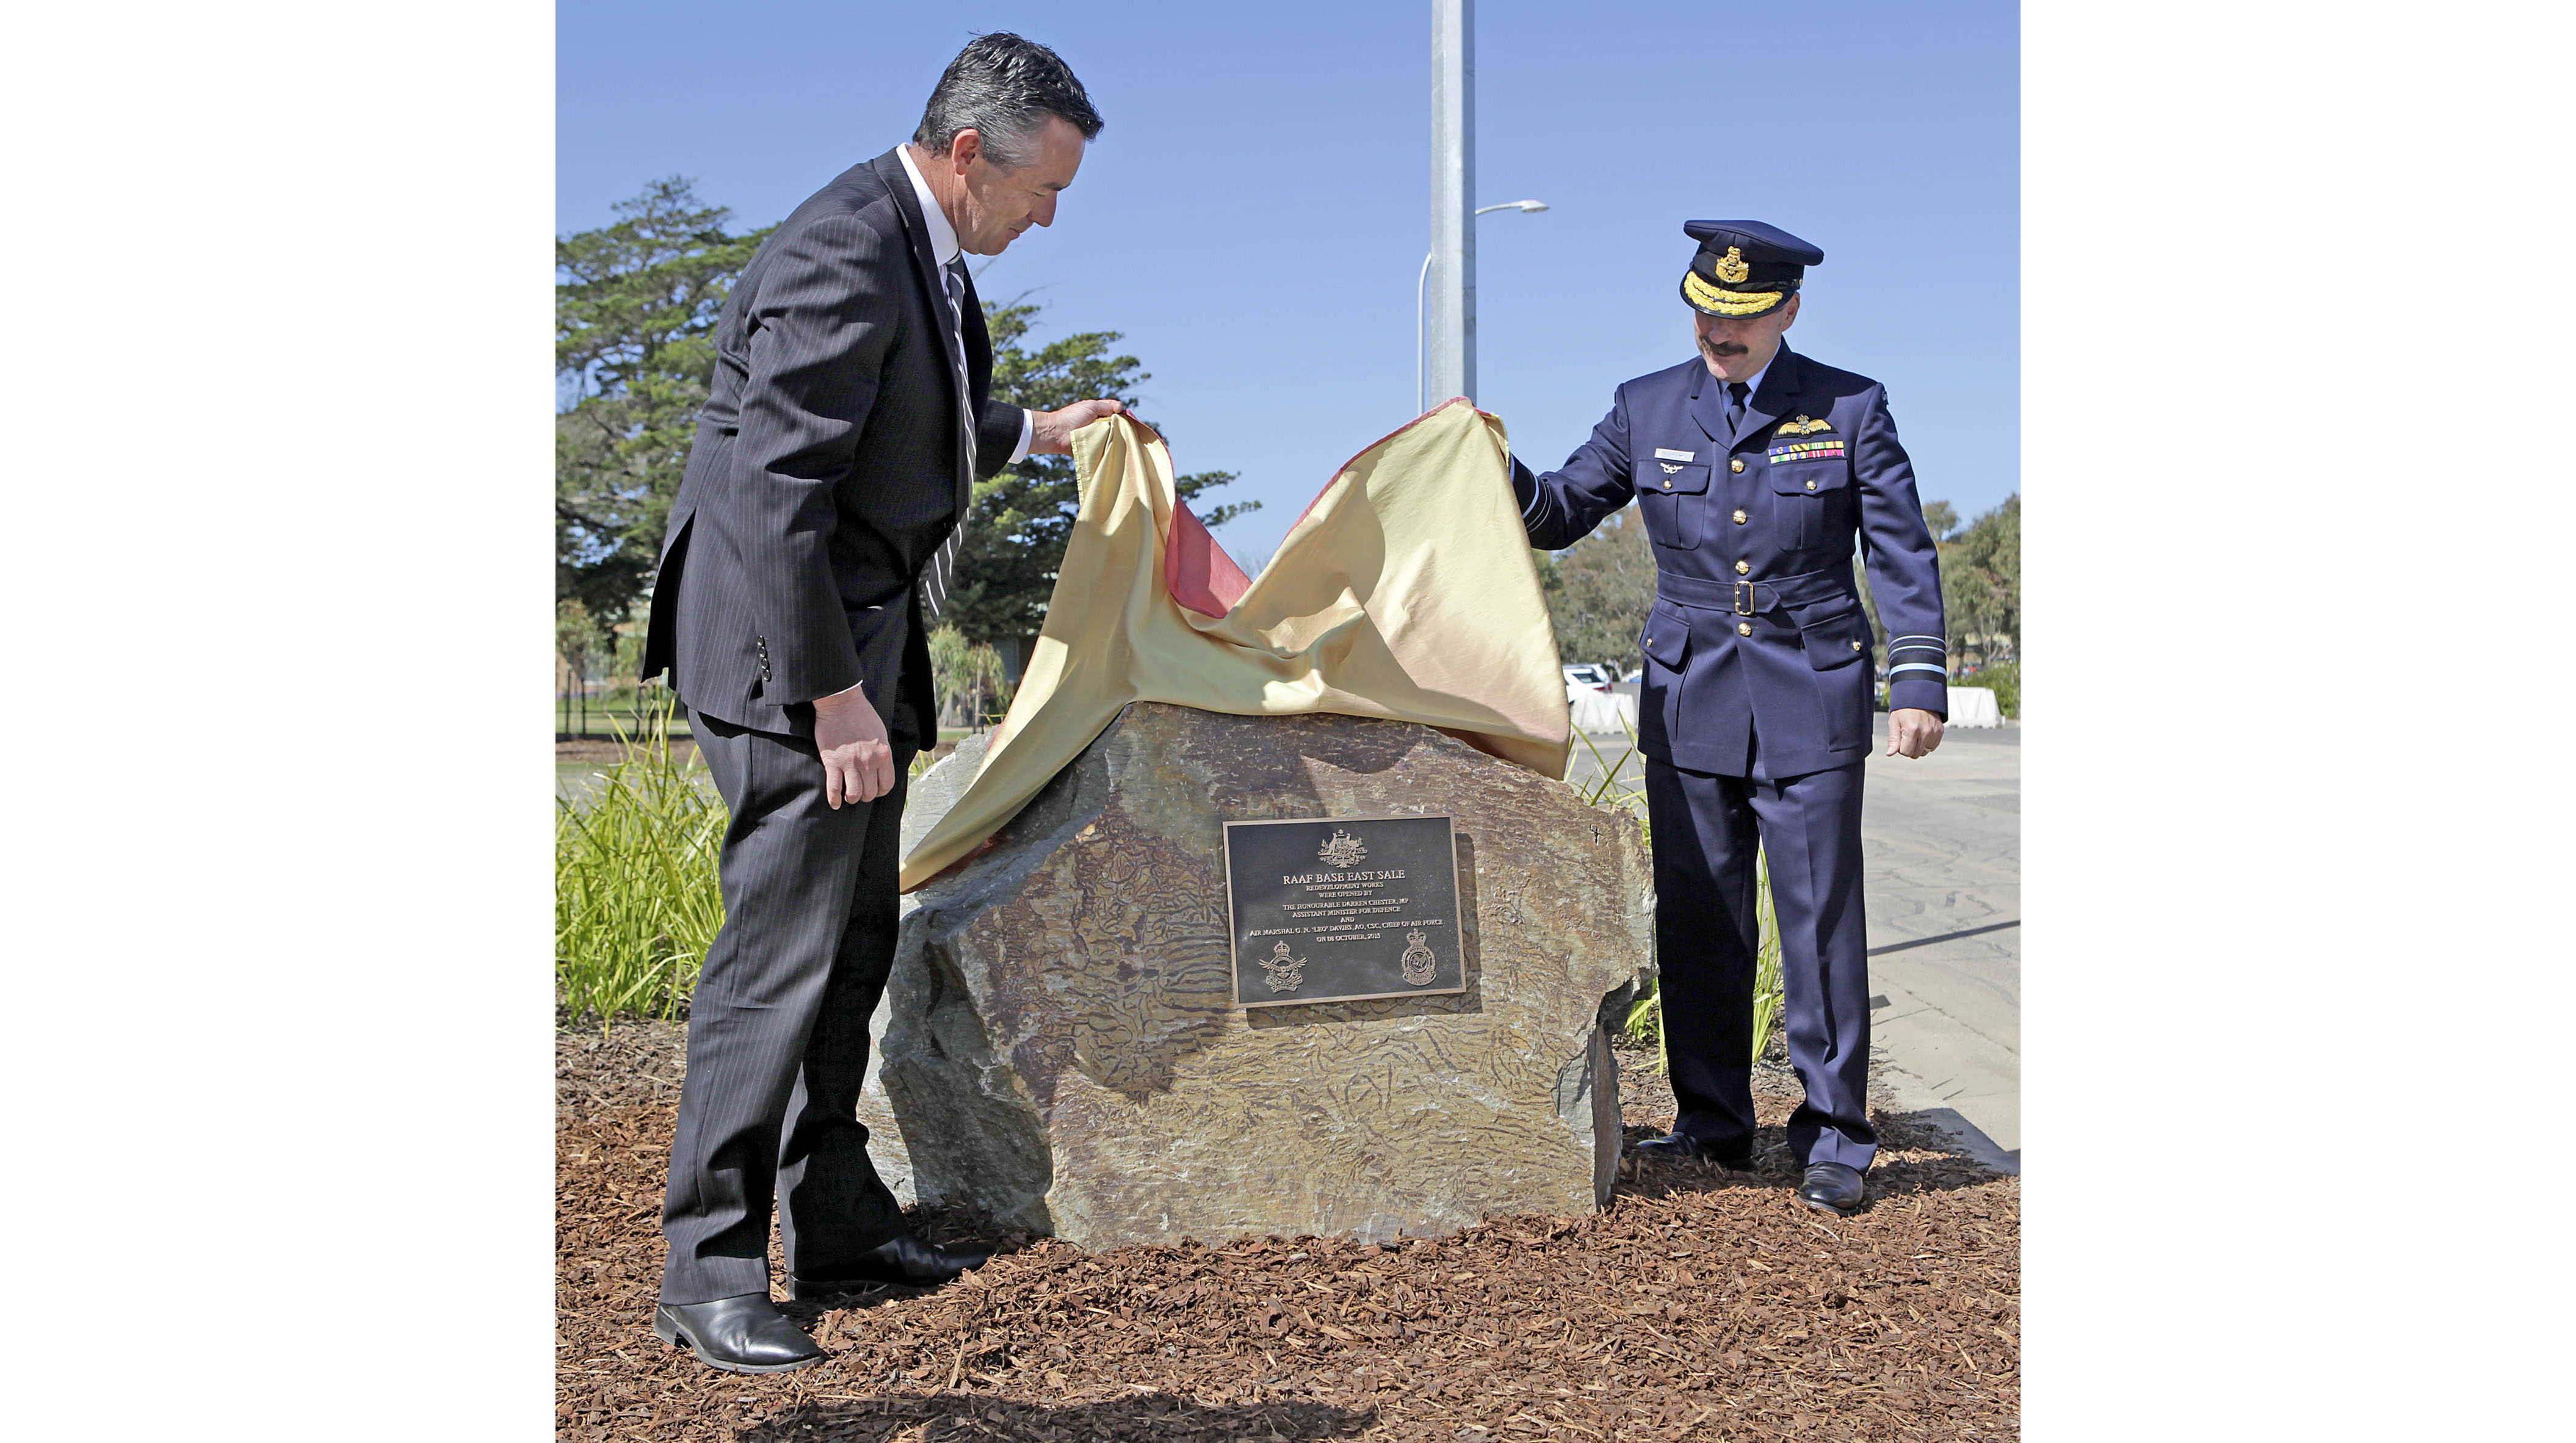 The Chief of Air Force, Air Marshal Leo Davies, AO, CSC, with The Hon Darren Chester MP, Assistant Minister for Defence, officially open the new Physical Fitness Training Facility at RAAF Base East Sale.